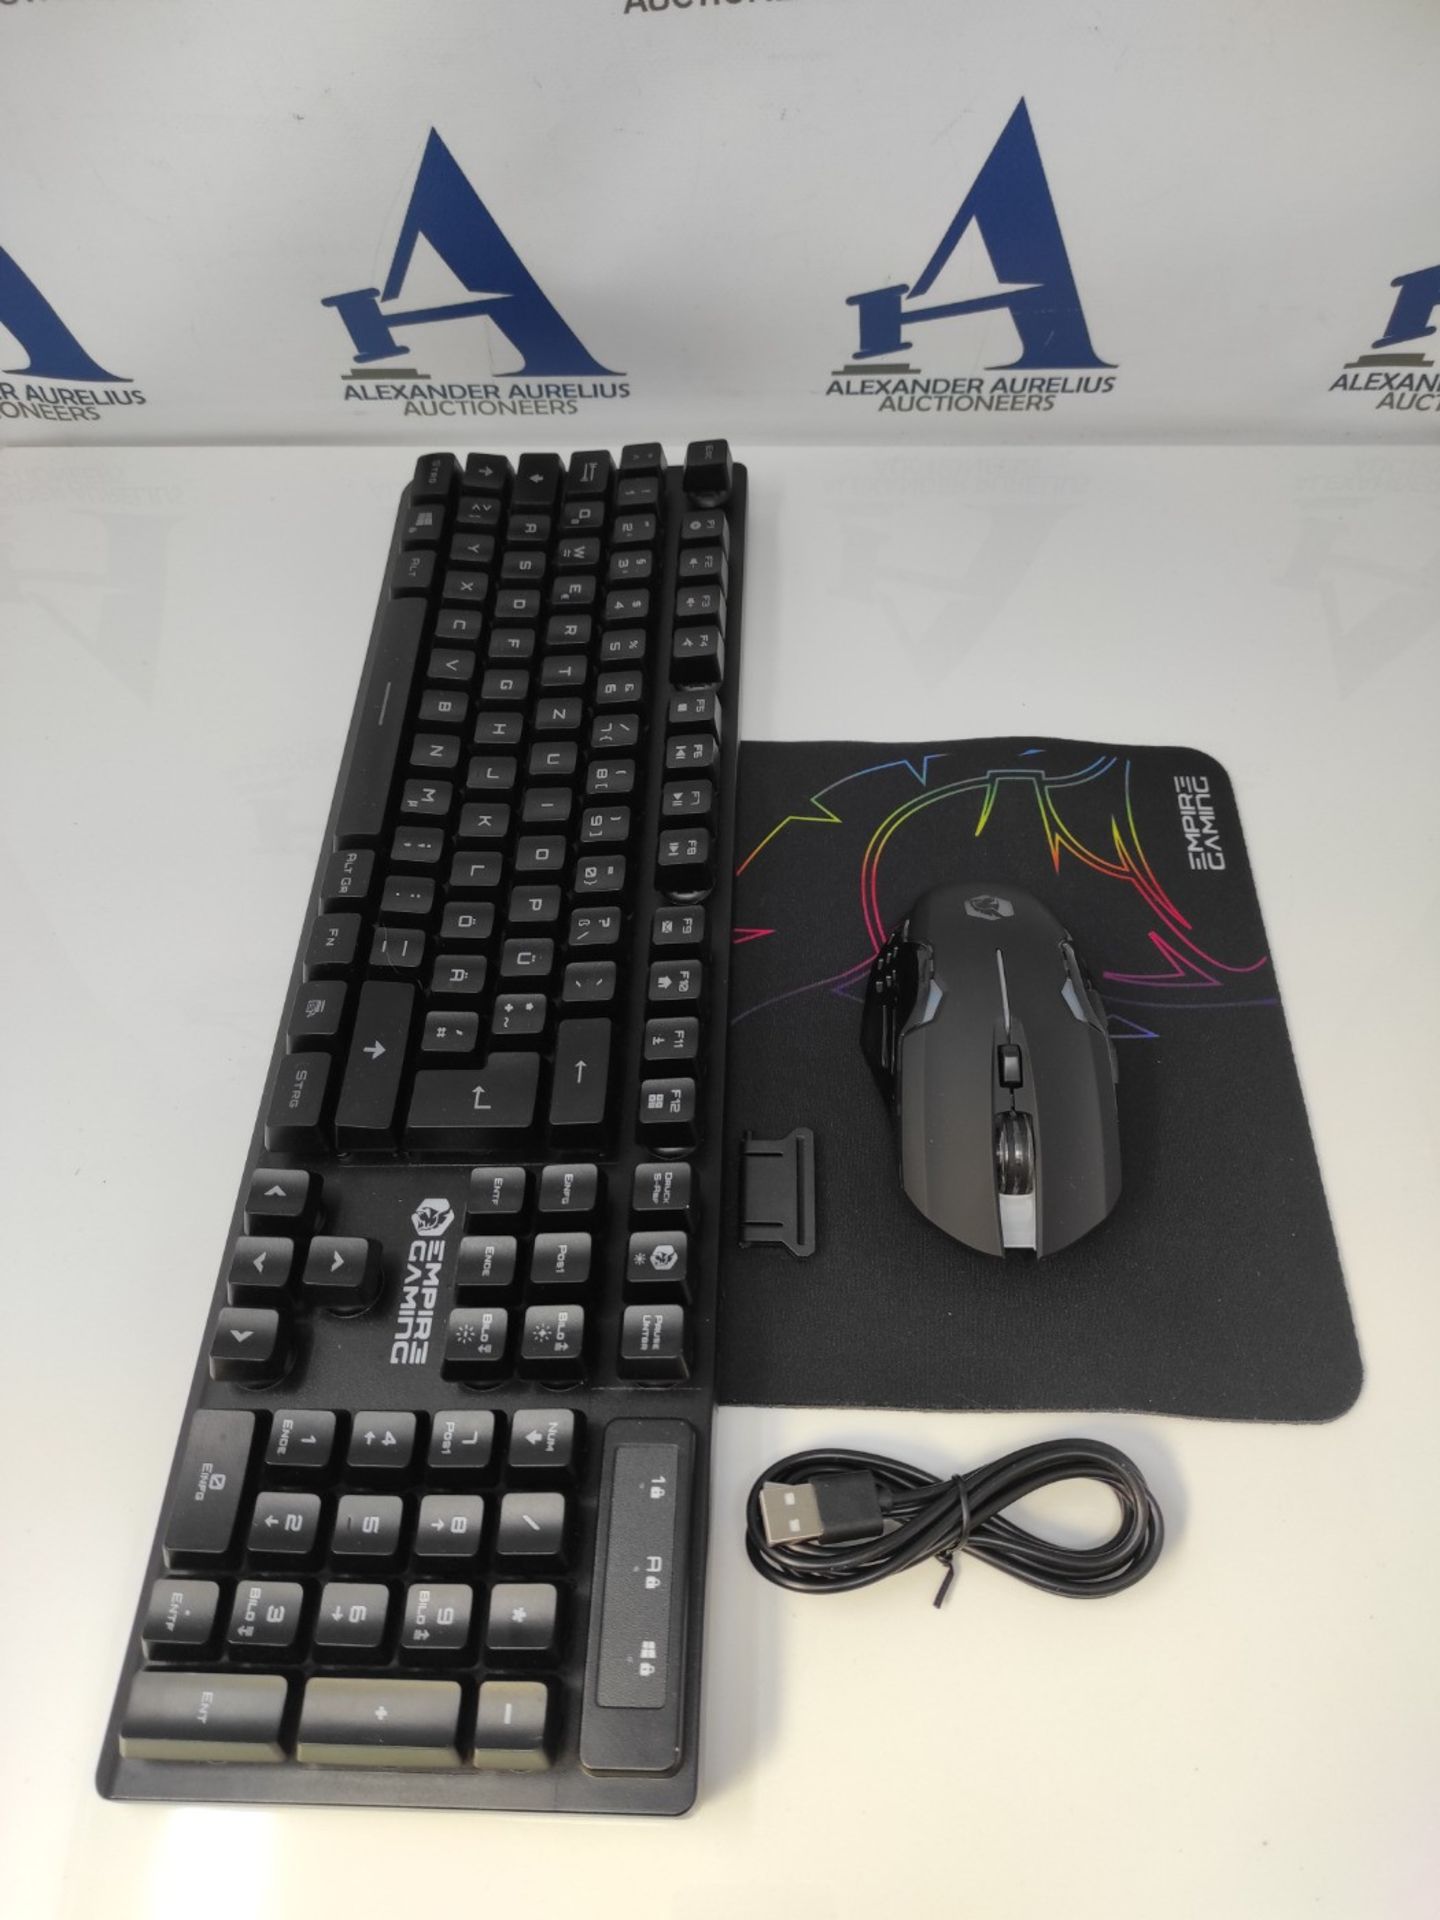 EMPIRE GAMING - Armor RF800 Wireless Rechargeable Gaming Keyboard and Mouse Set QWERTZ - Image 2 of 2